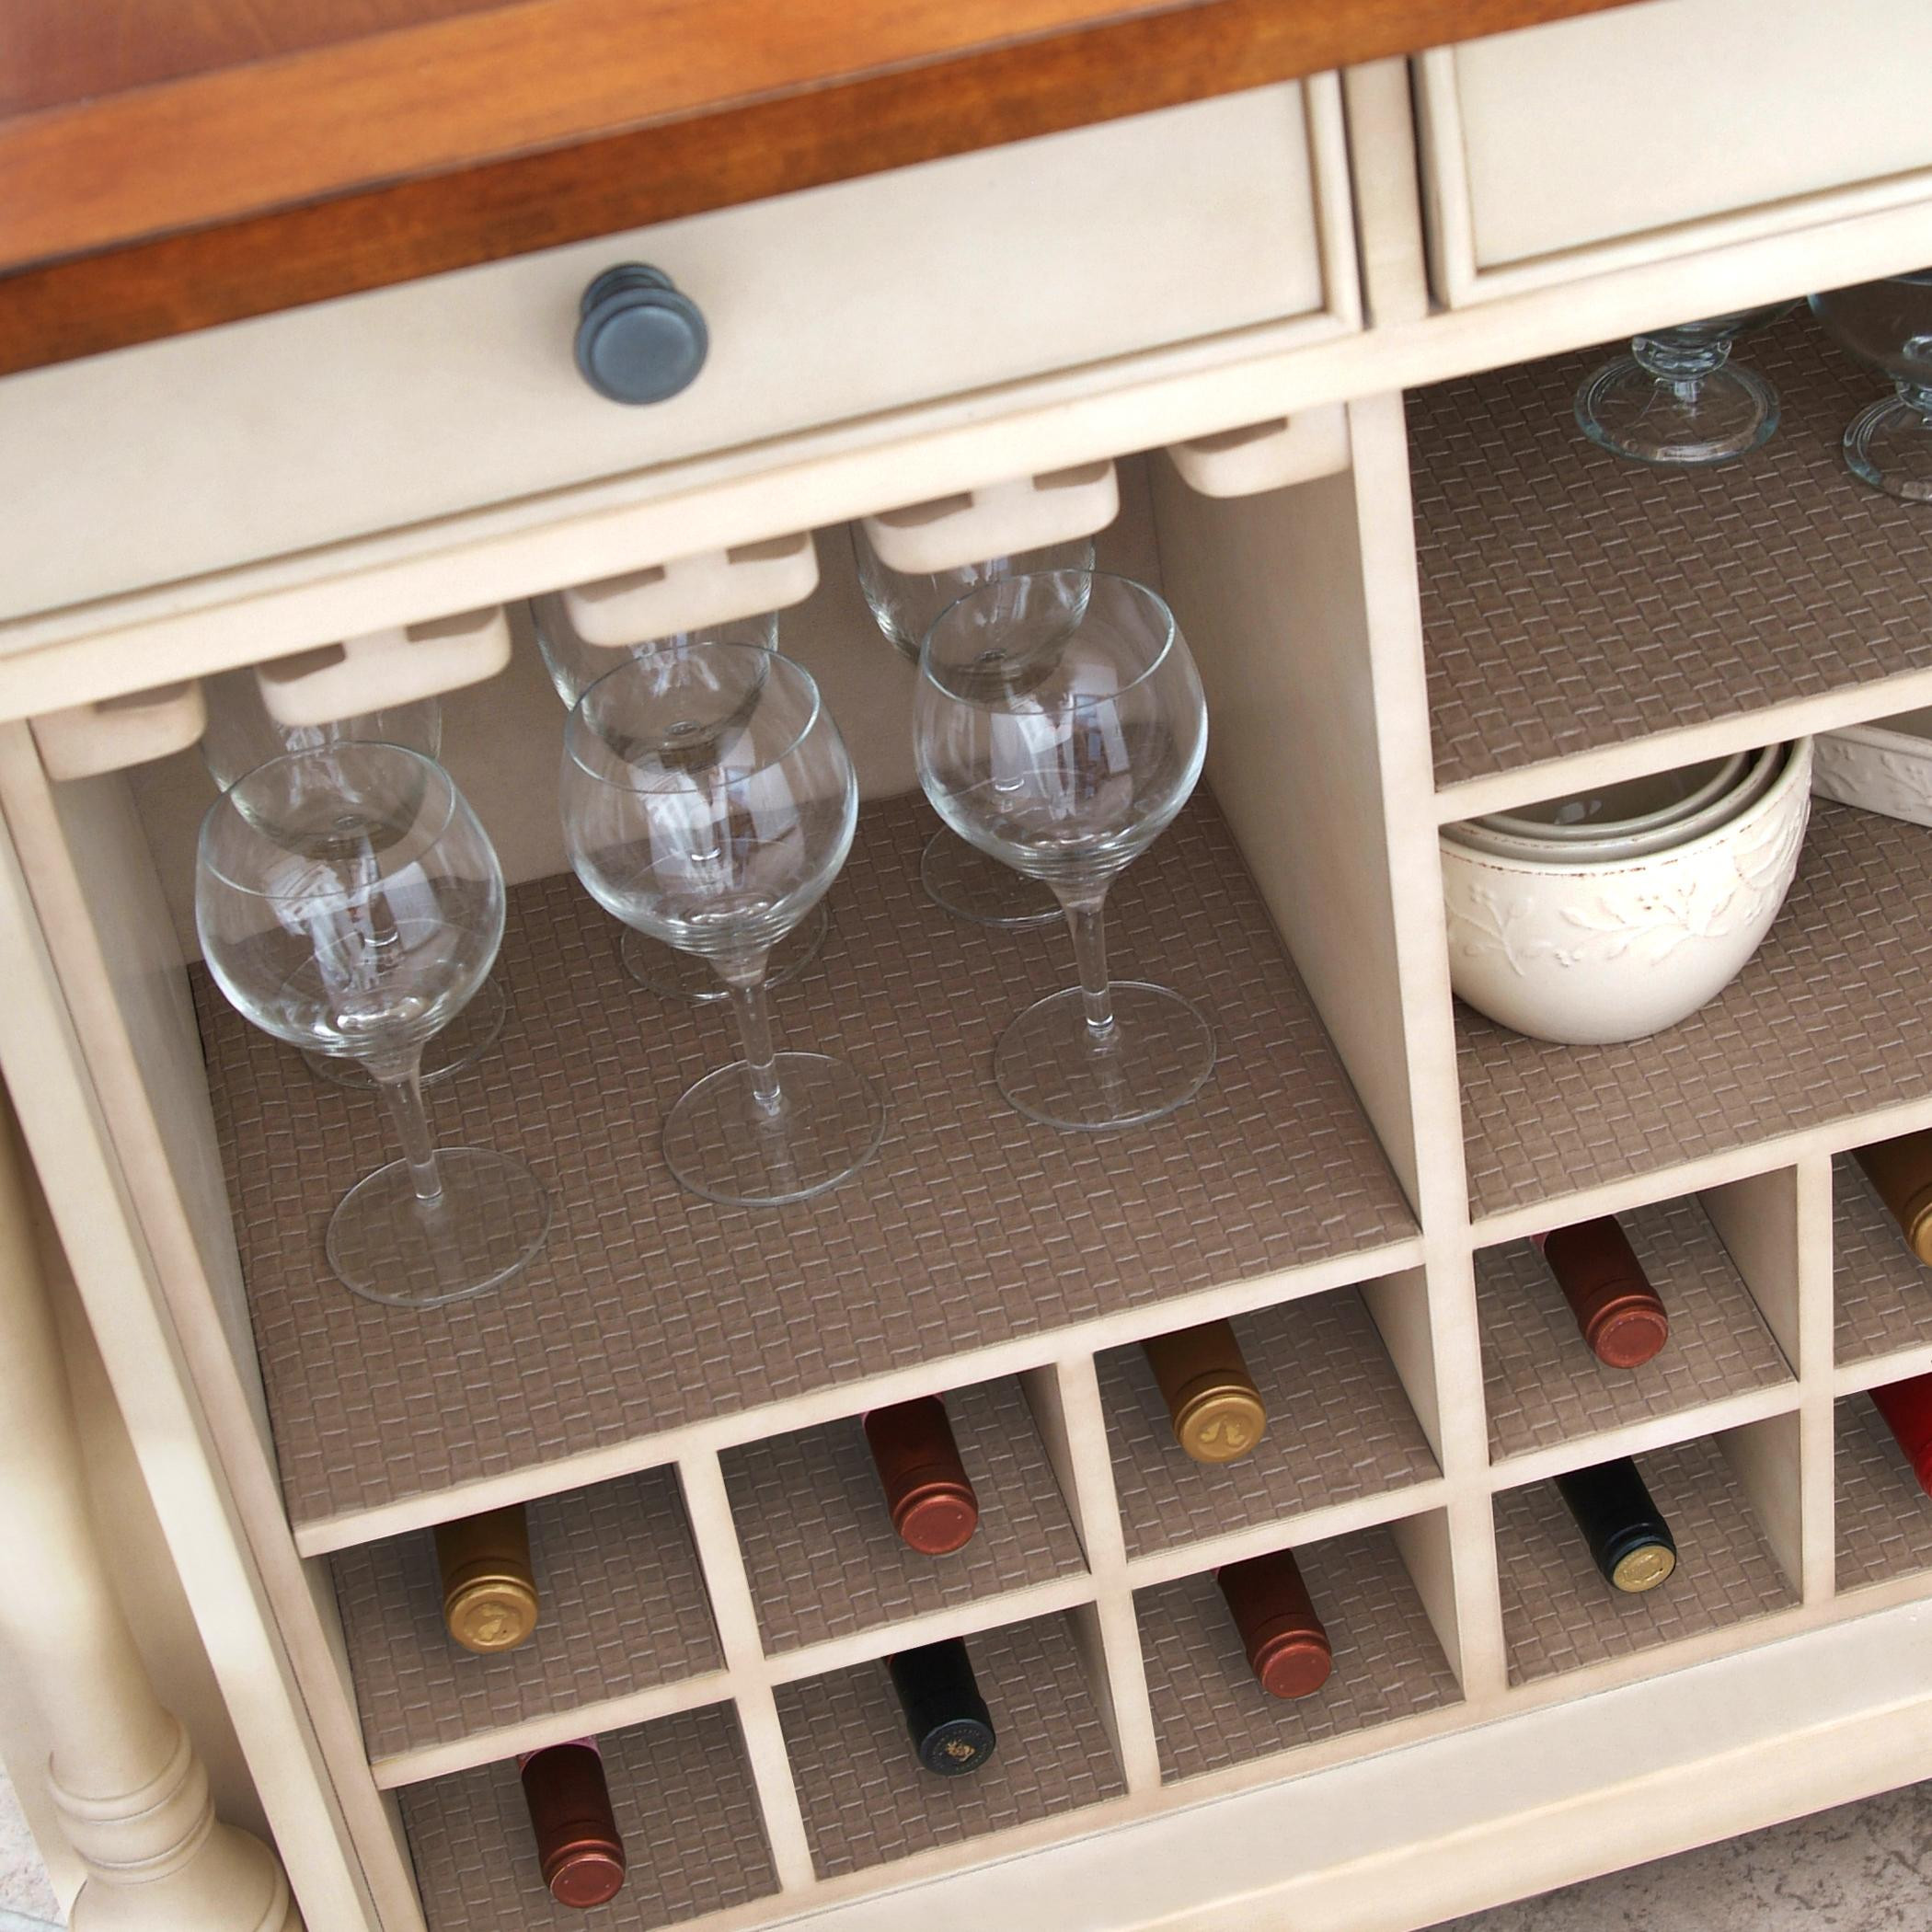 Kitchen Cabinet Liner
 The Best Drawers Liners For Kitchen The Use And The Types